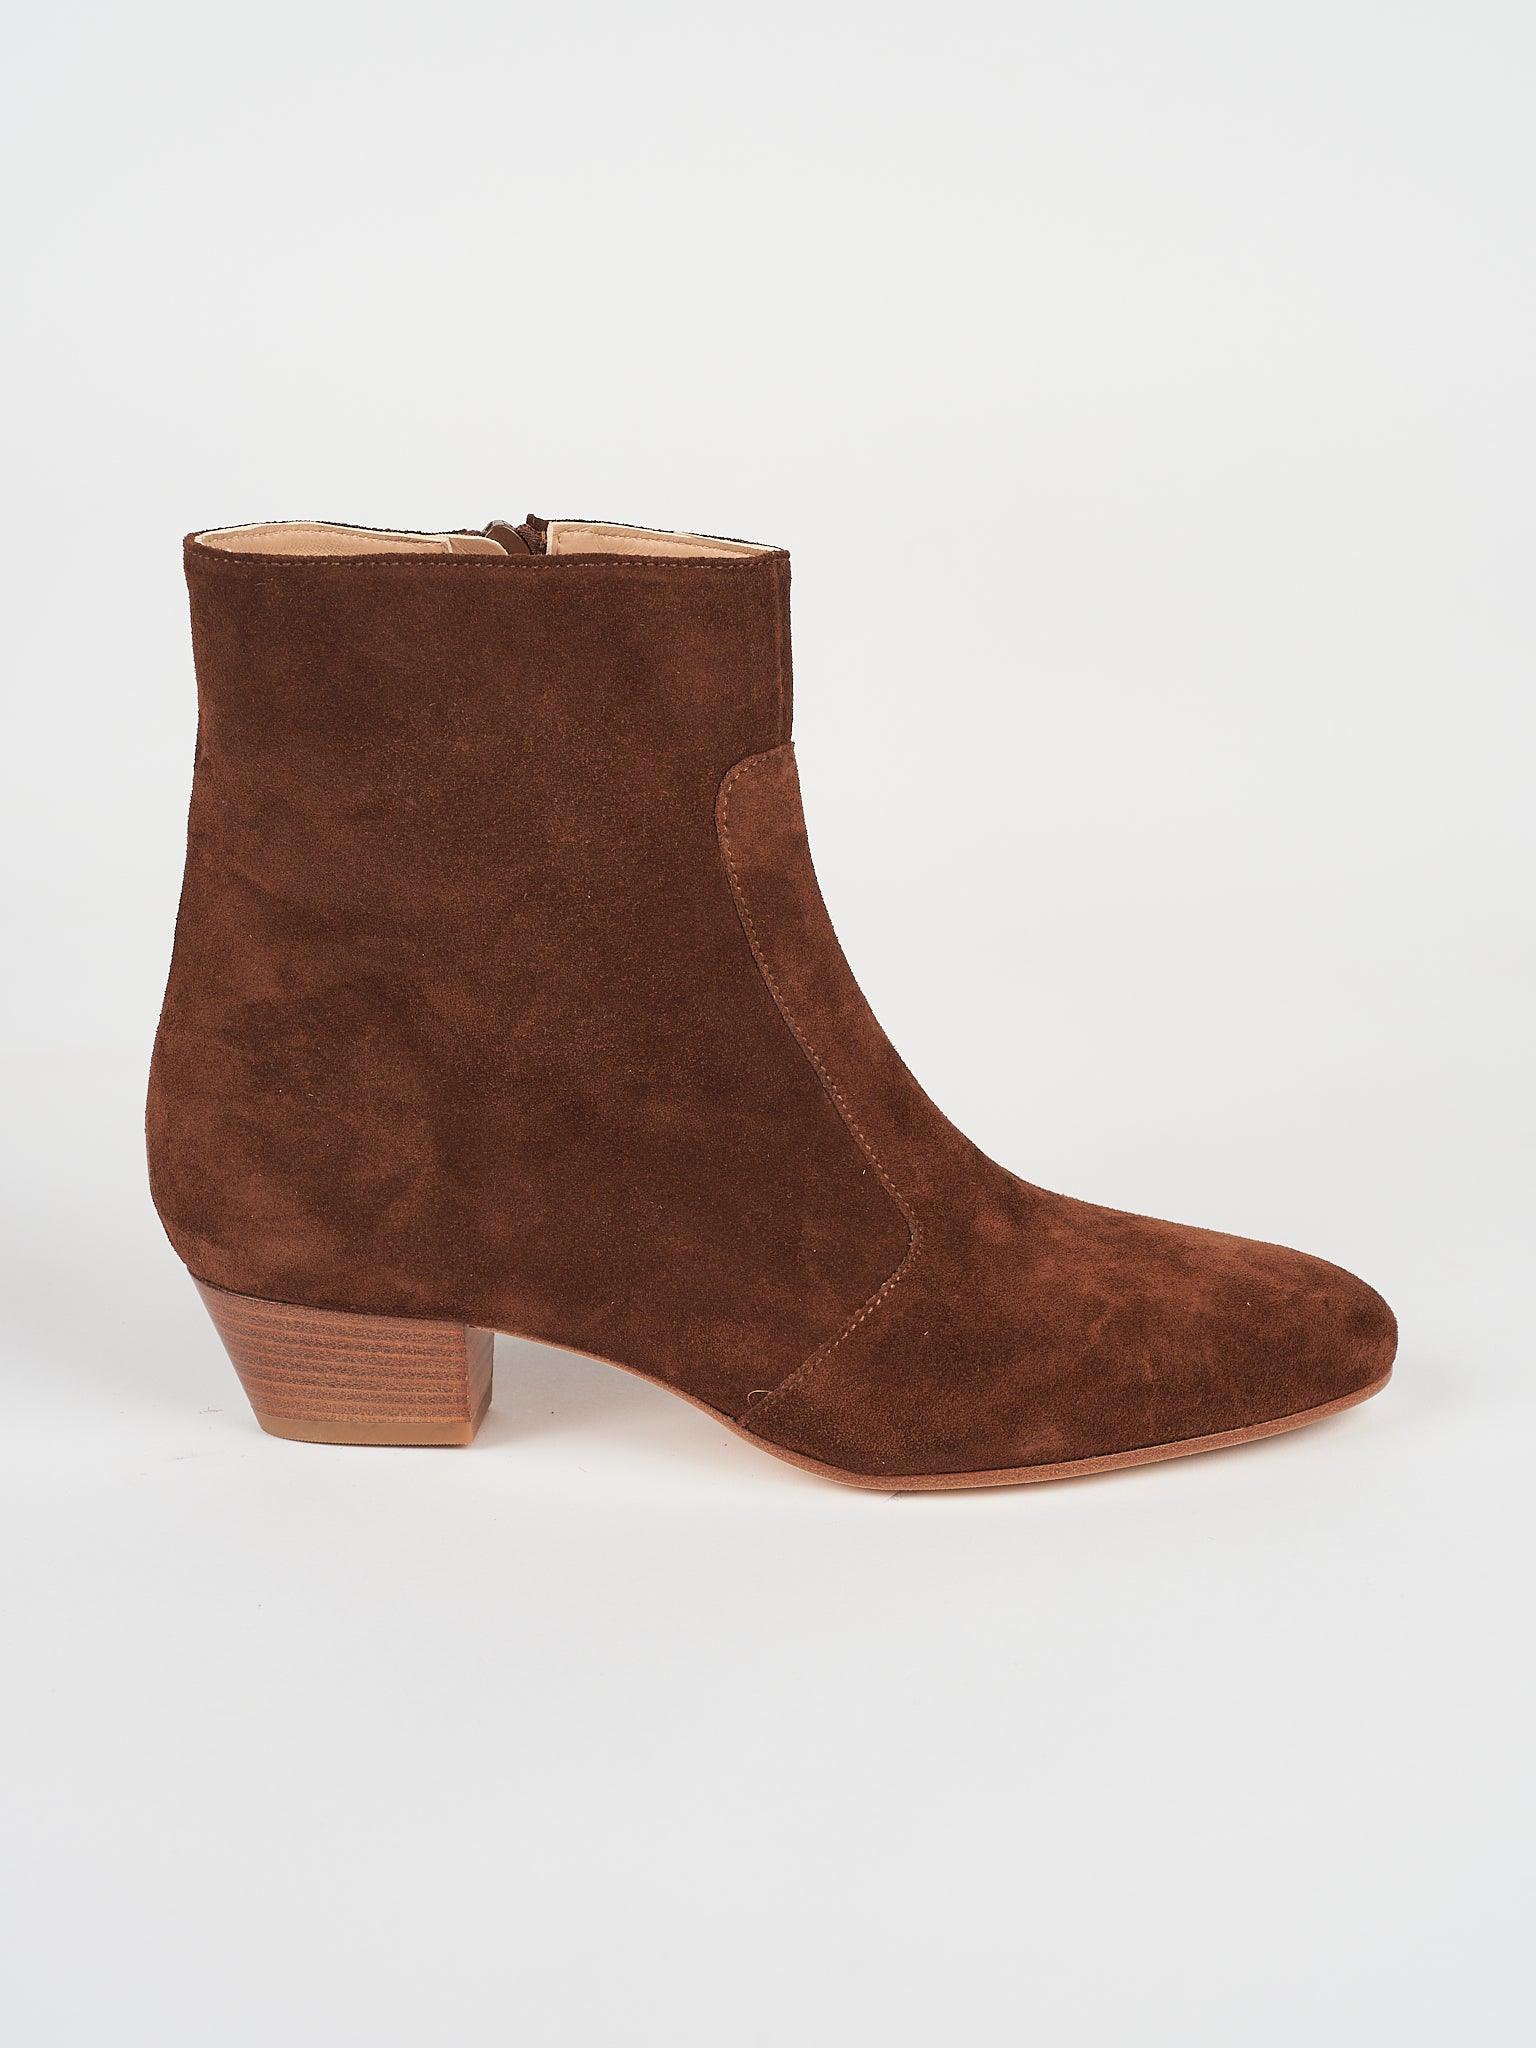 The Beatnik in Chocolate Suede Side Outside View